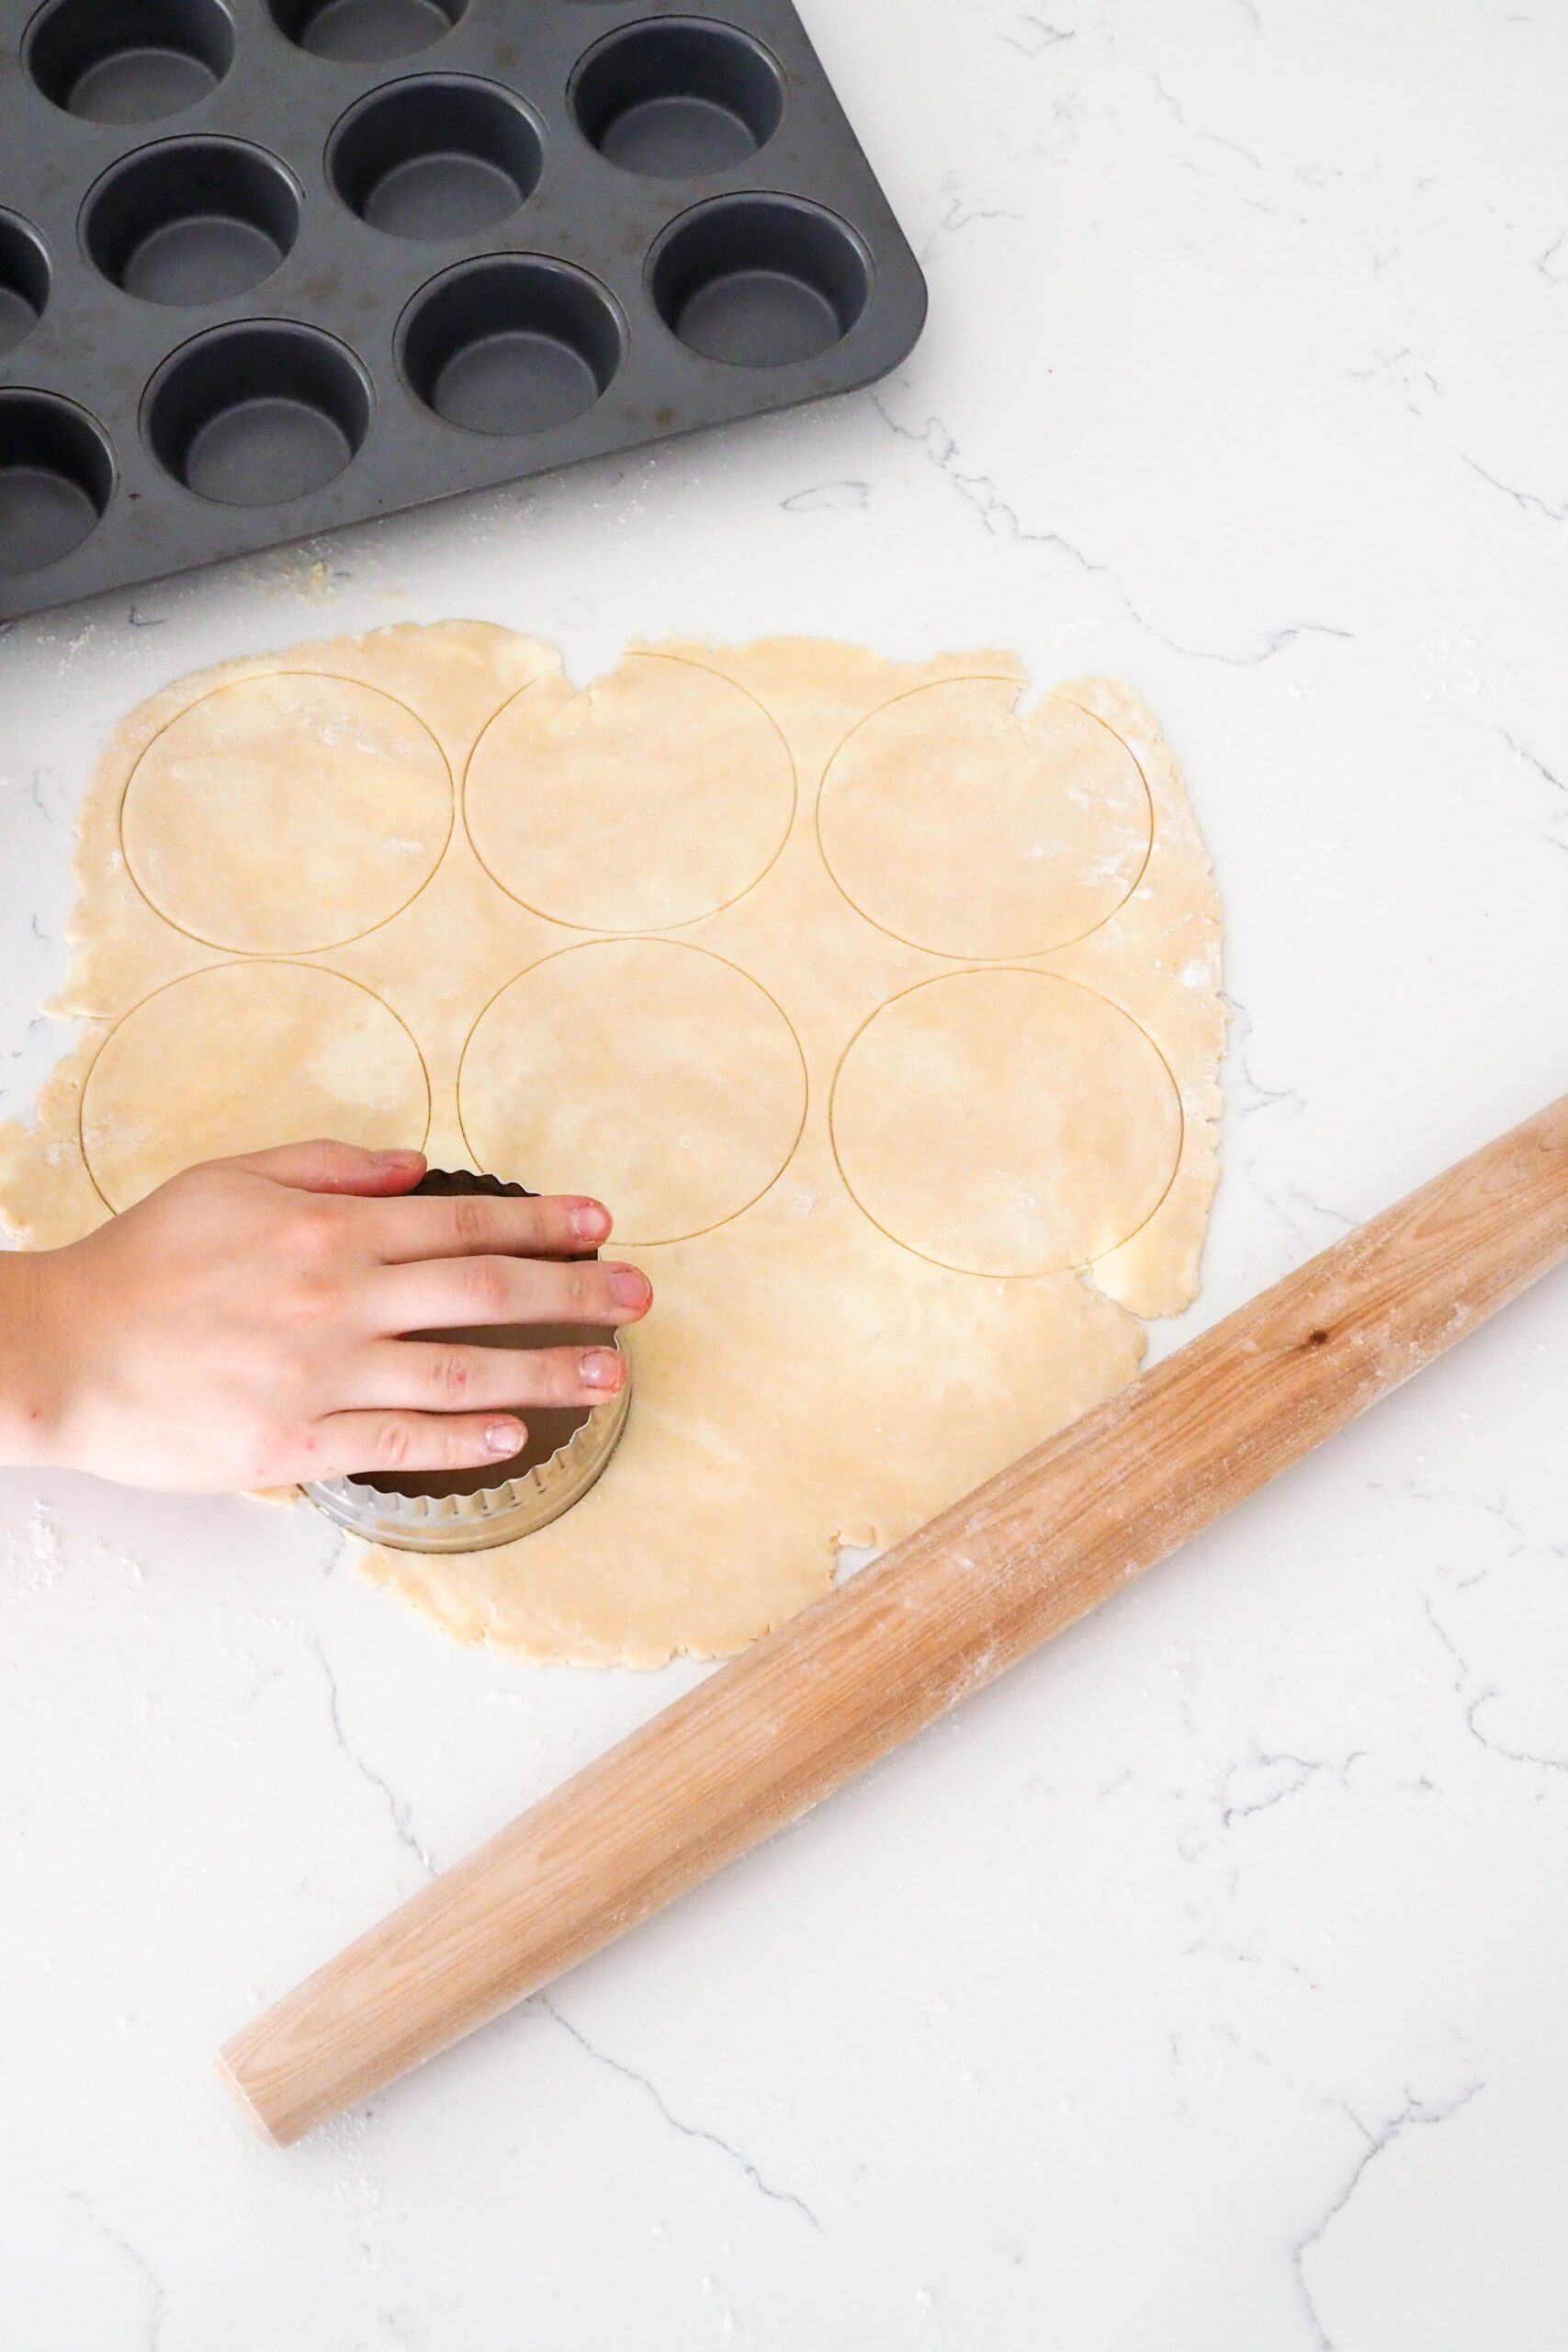 A hand cuts circles out of a rolled out pie crust.